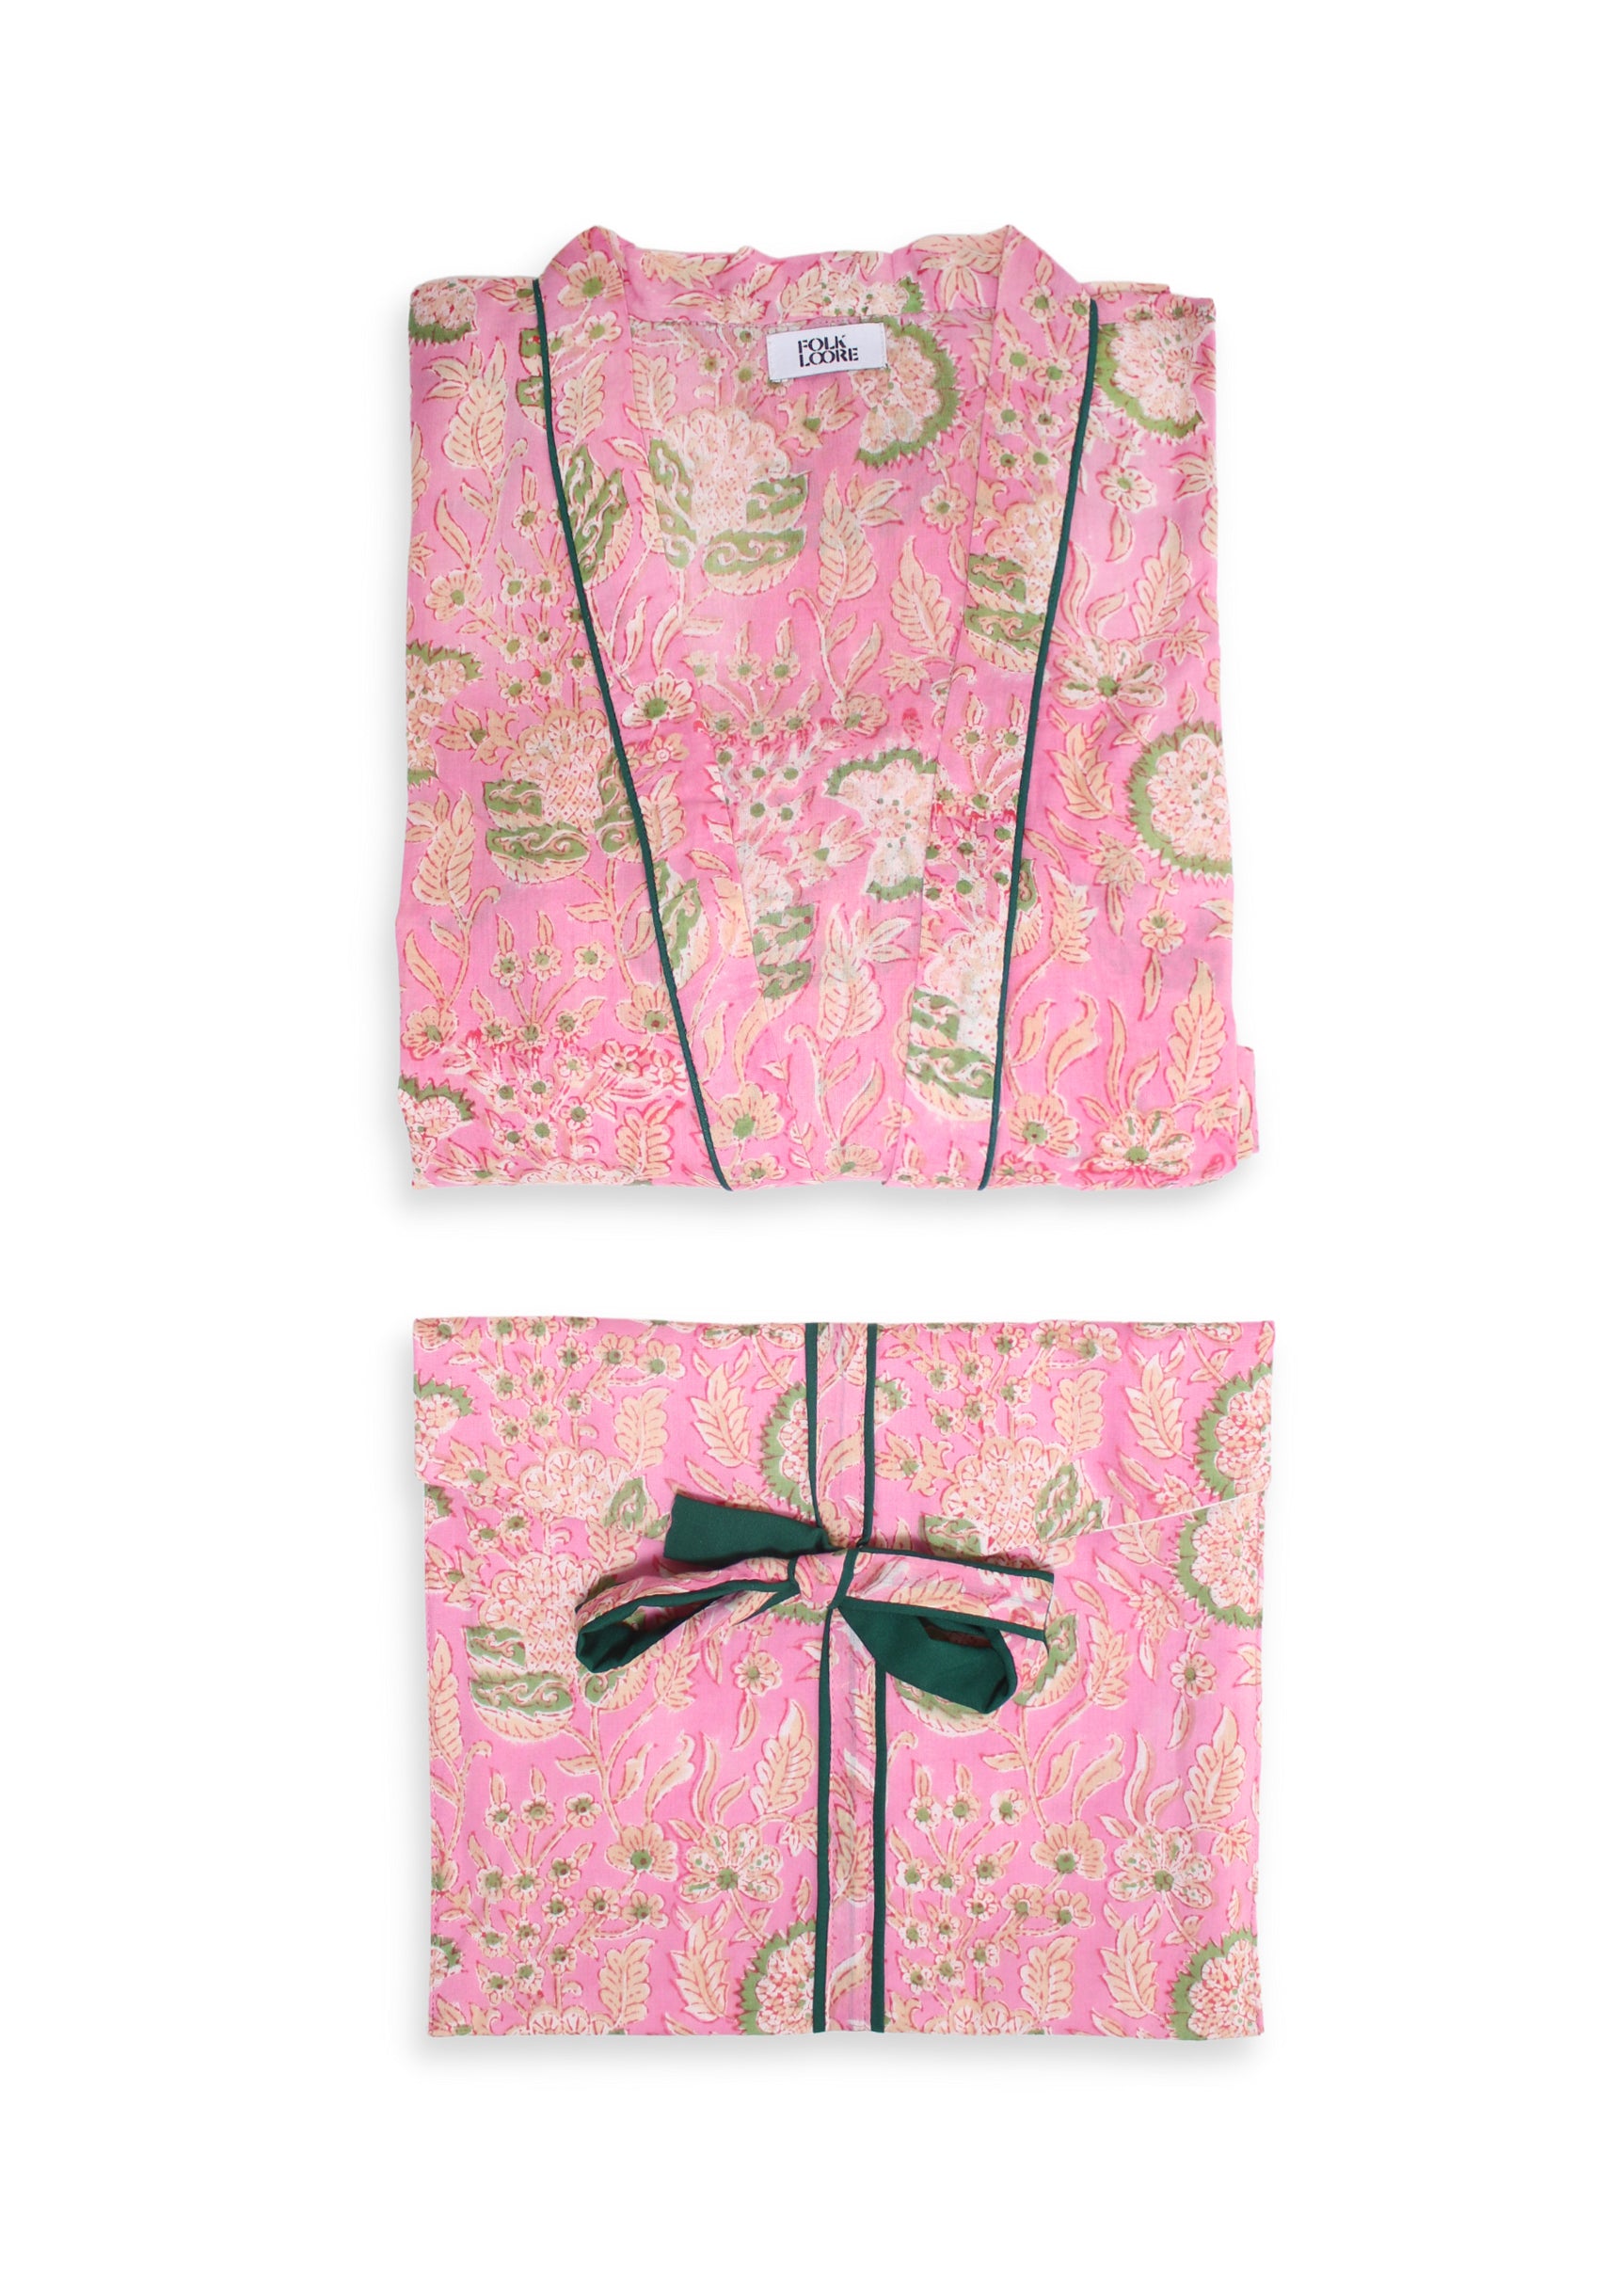 Unique cotton block-printed dressing gown, handmade in India by the local artisans. Refined with a belt and pockets, pack your nightgown for an exotic trip or wear it in the comfort of your own city home at winter time! DETAILS AND CARE Pink and green pattern with green piping 100% cotton Hand wash with cold water and mild detergent Do not soak Dry in the shade, direct sunlight can fade color As all handmade prints, there may be a small amount of residual color in the fabric ONE SIZE